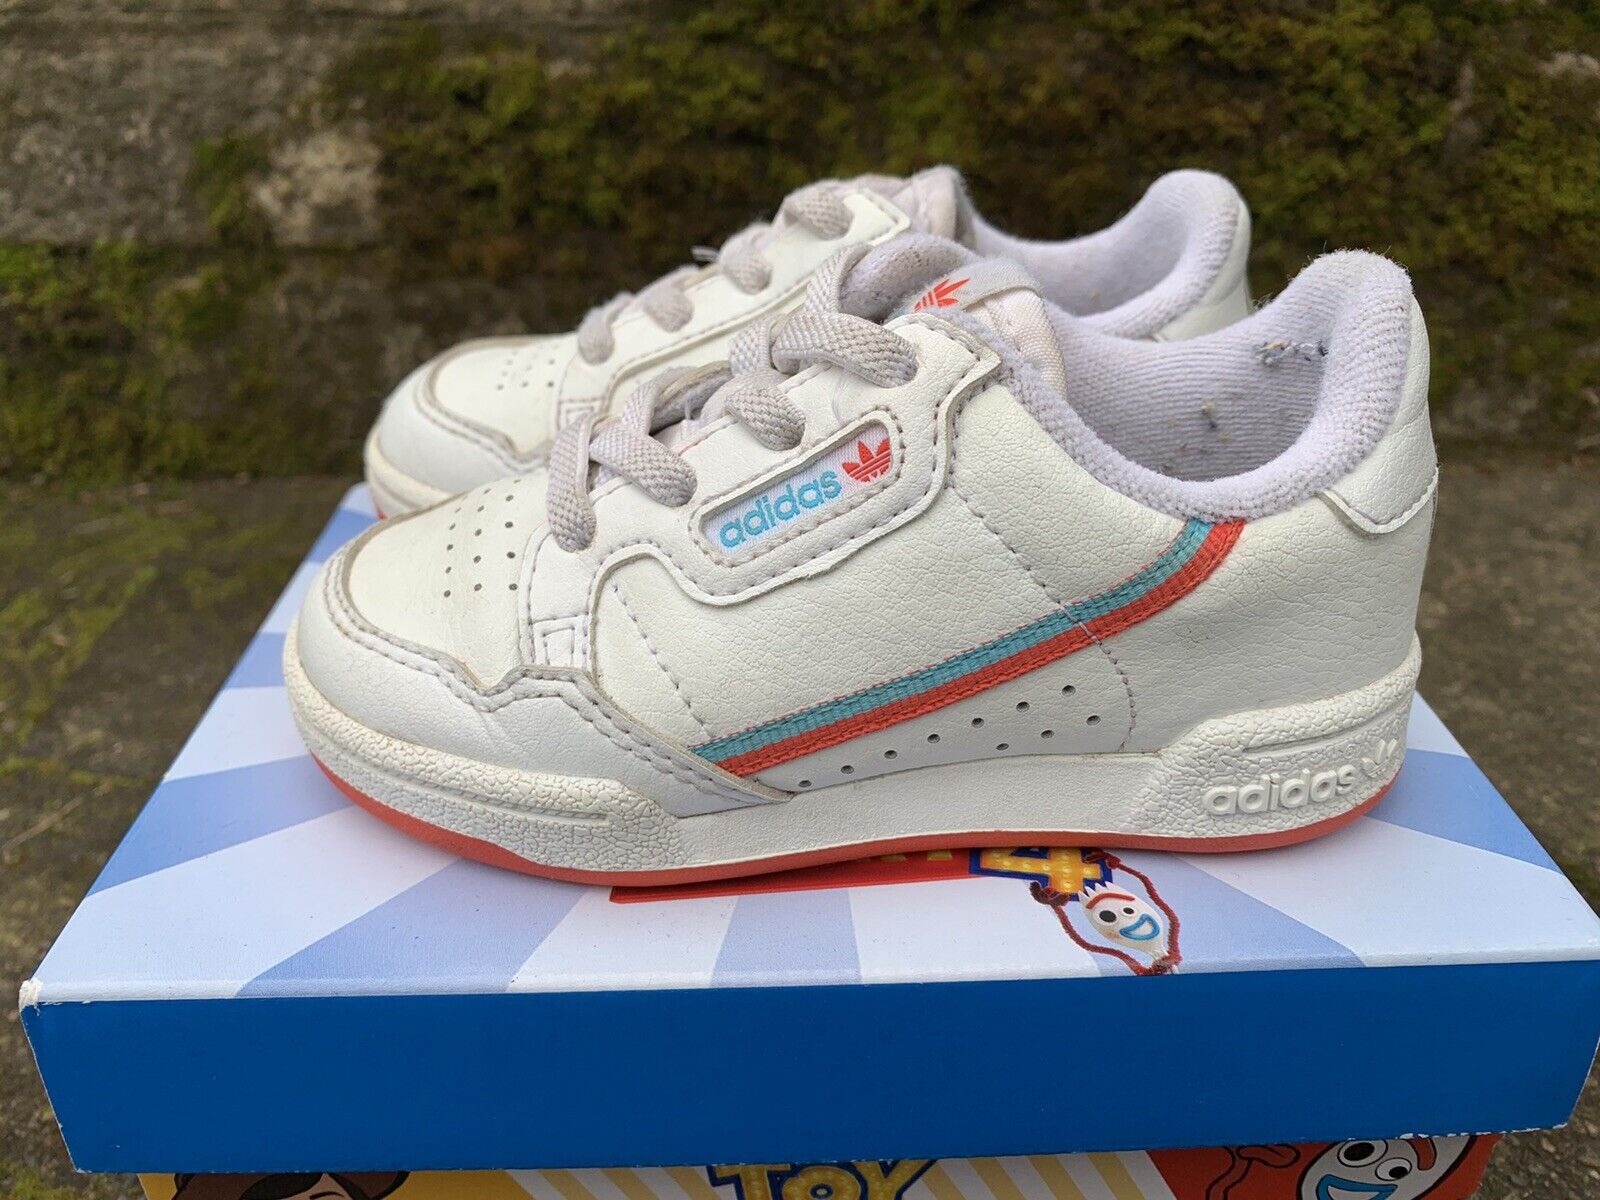 Adidas Continental 80, Toy Story 4, Forky, Infants Size 1k, Excellent  Condition | eBay